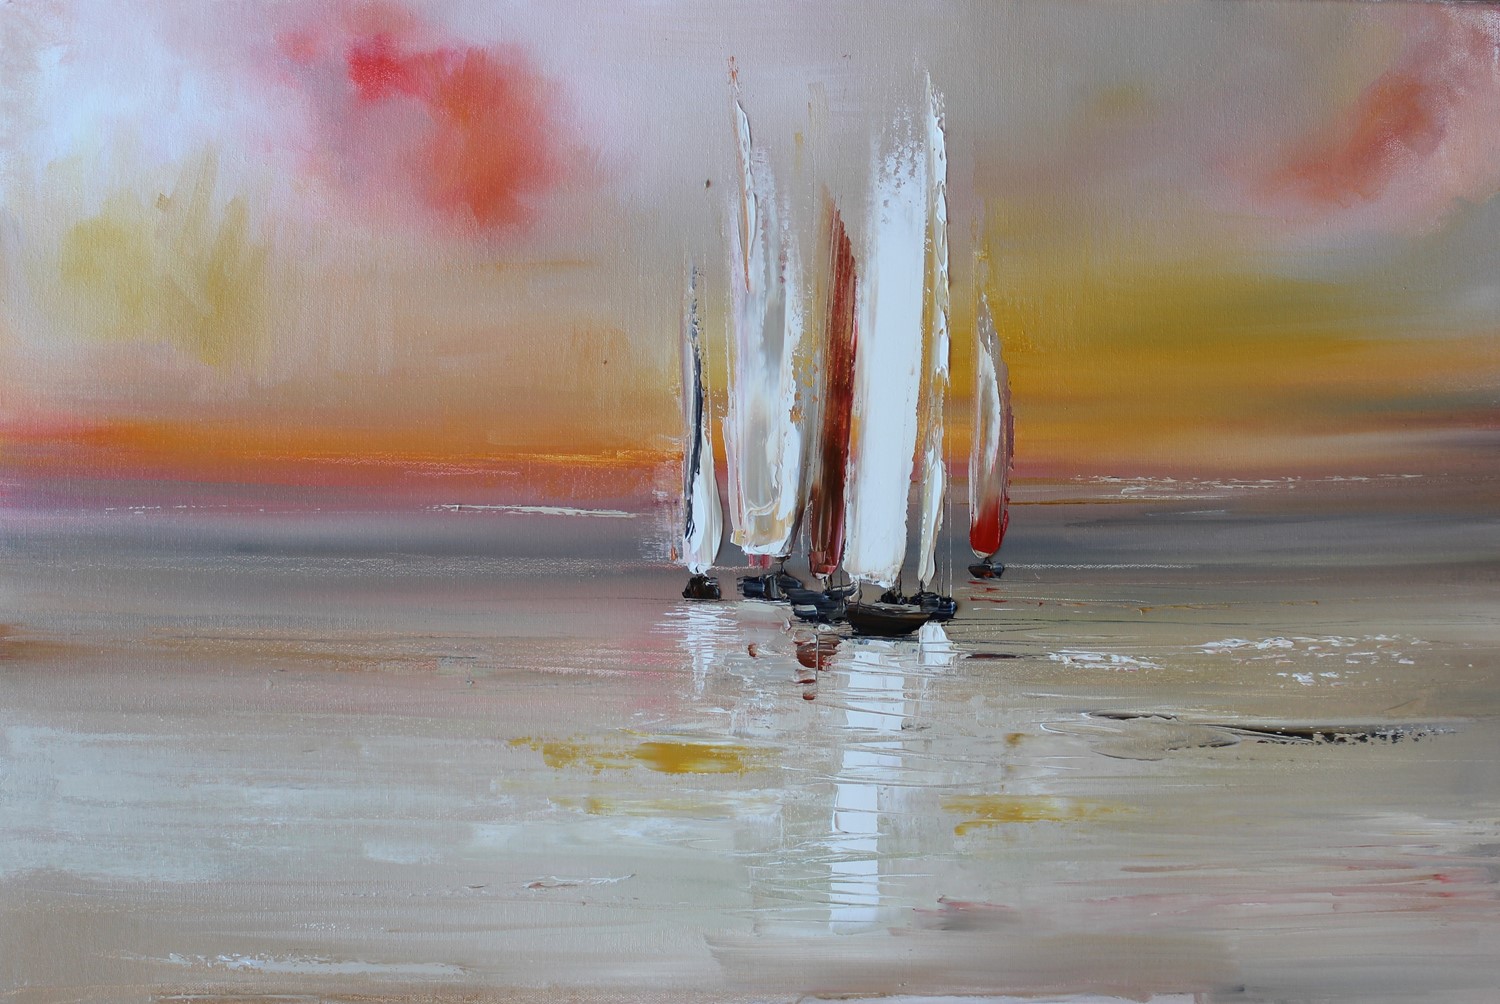 'Sails Reflected' by artist Rosanne Barr